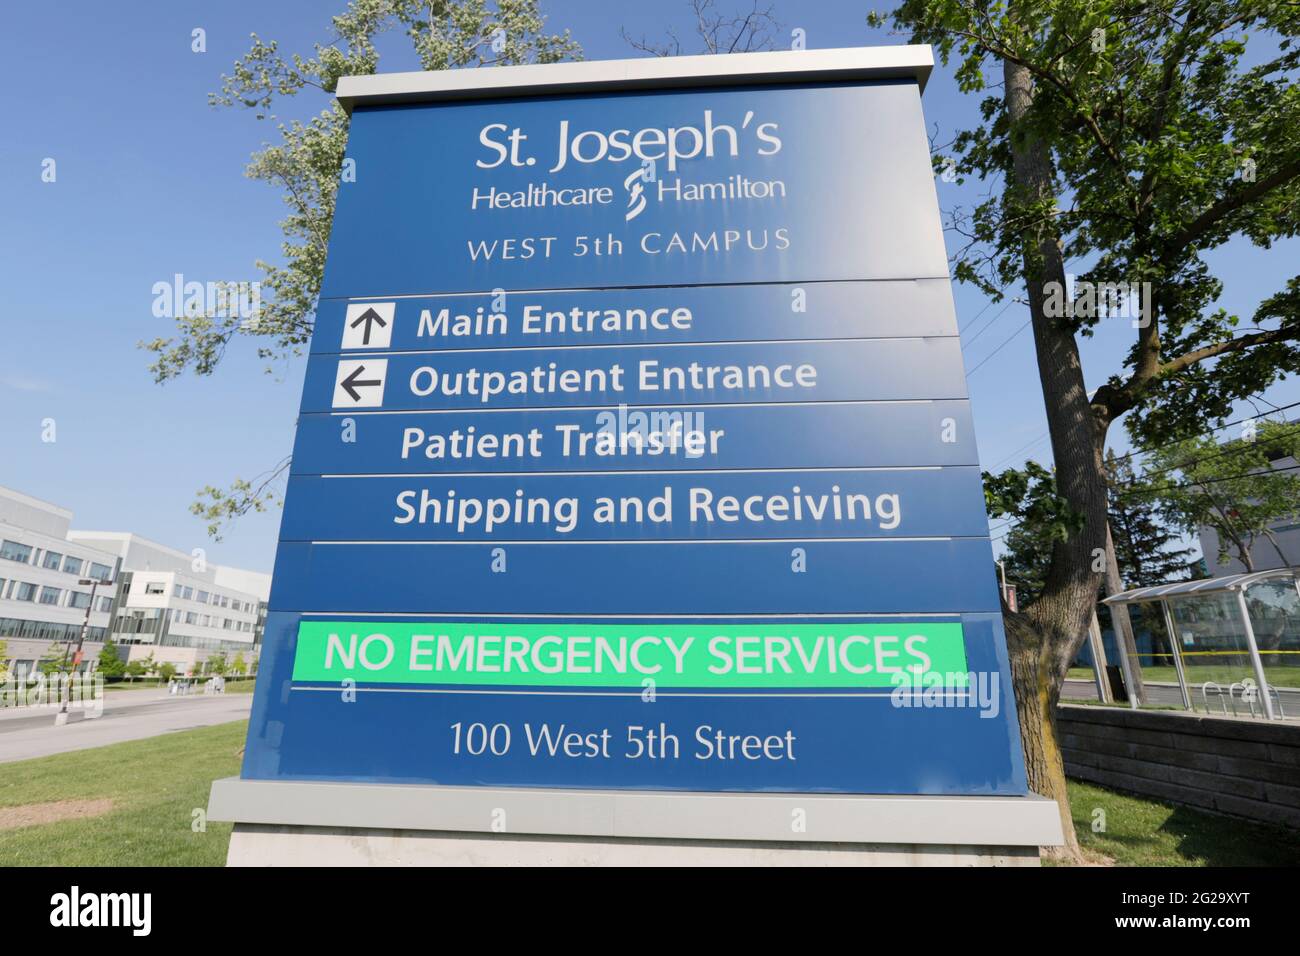 A sign is showing the directions to various locations at the St. Joseph's Hospital. Stock Photo